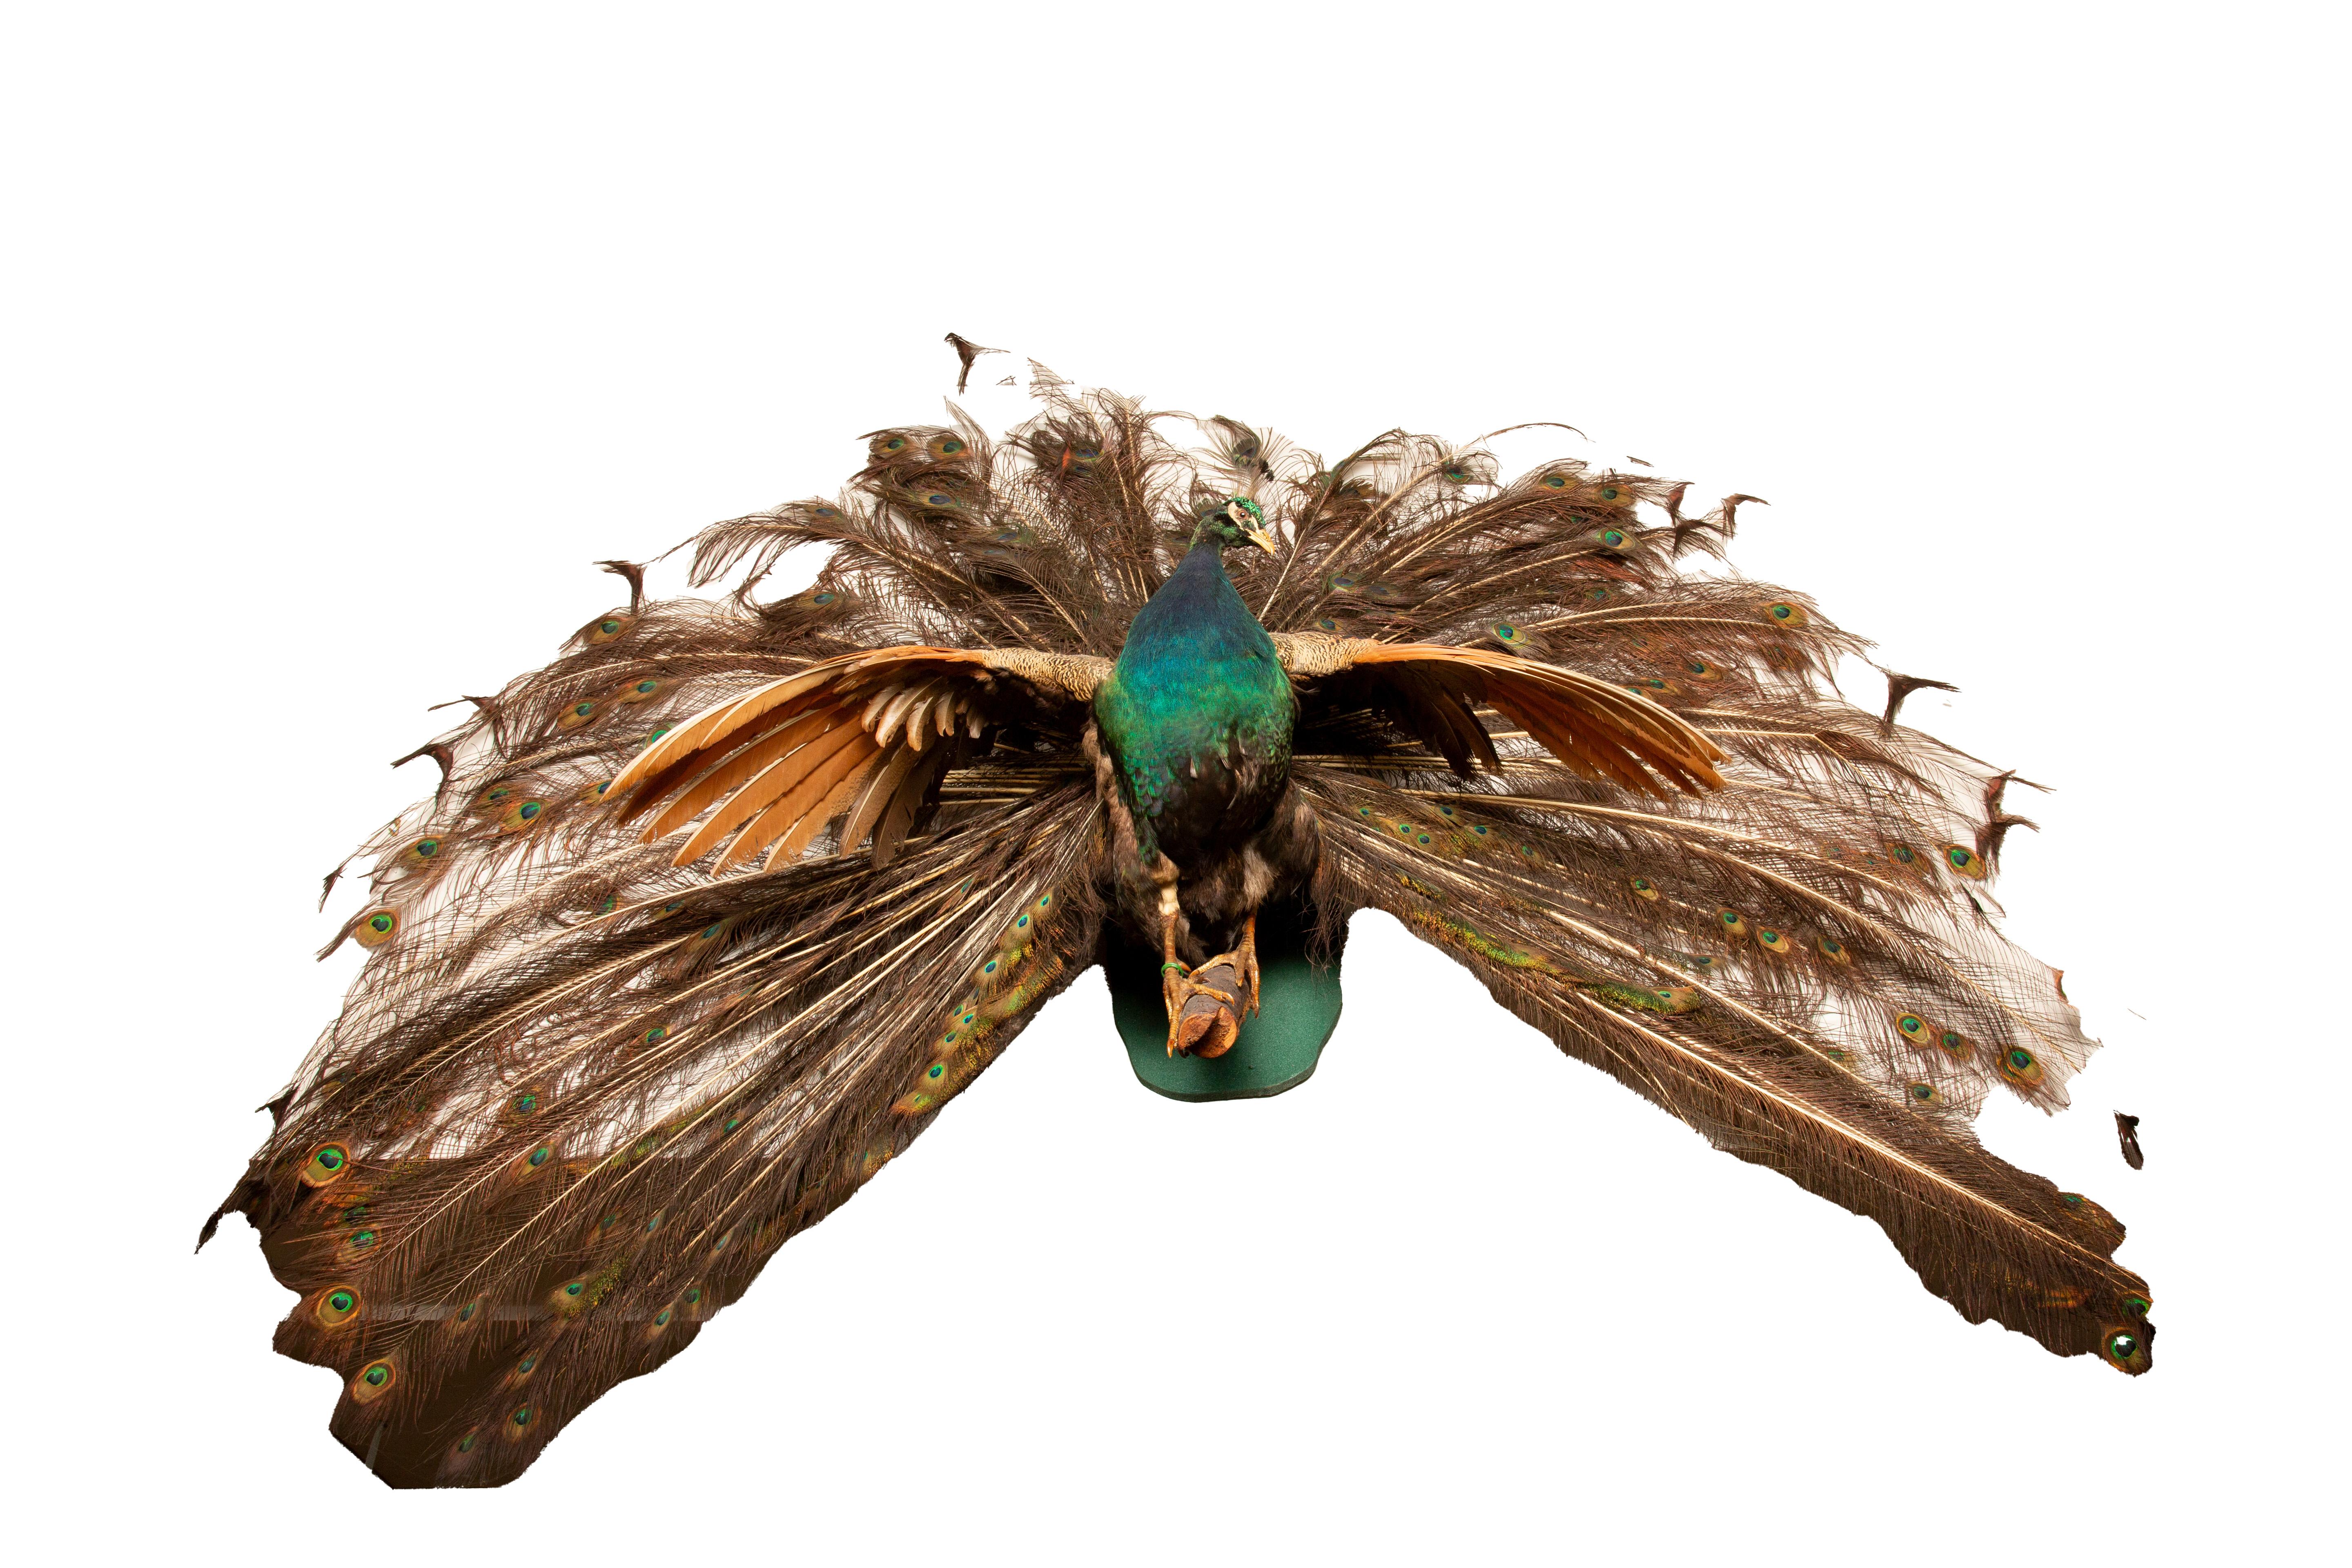 Indian Blue Peacock taxidermy, showcasing this magnificent bird in all its glory, with its resplendent feathers artfully fanned to captivate onlookers. Elevate your décor with this impressive, life-like masterpiece that adds an air of elegance and